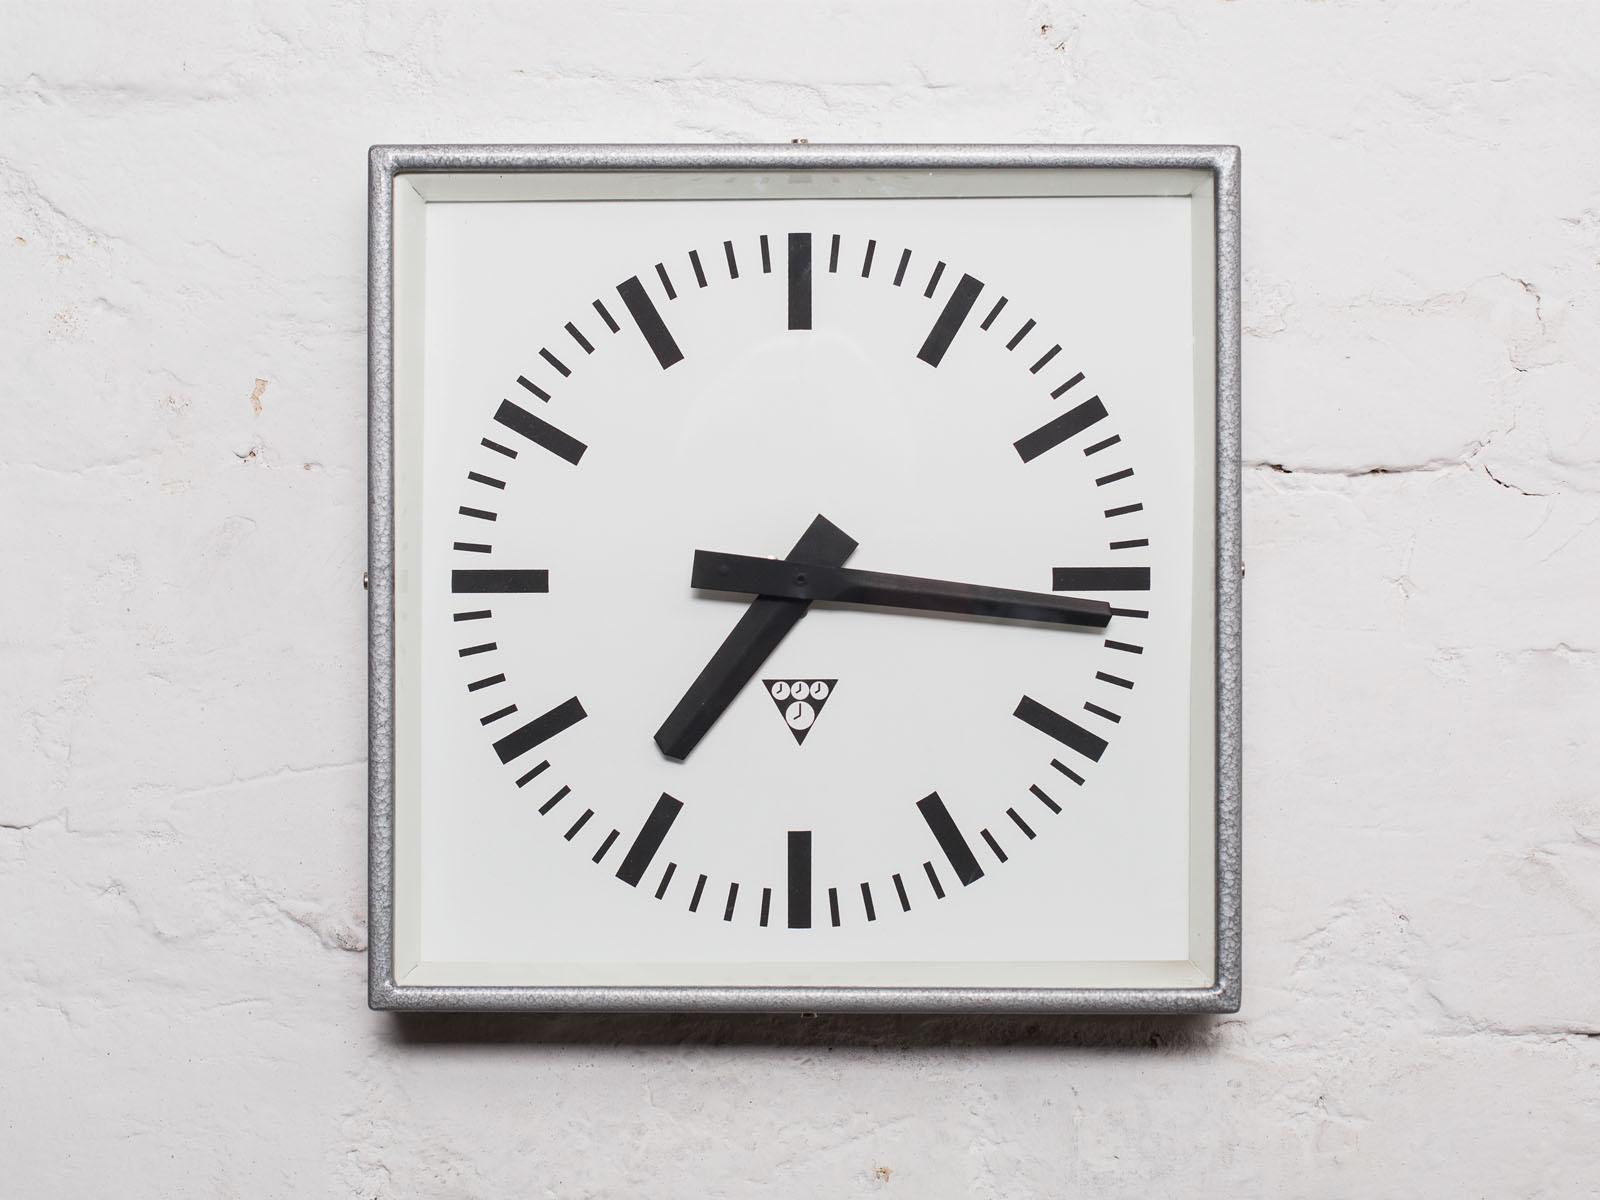 Czech Silver-Gray Industrial Square Wall Clock by Pragotron, 1970s For Sale